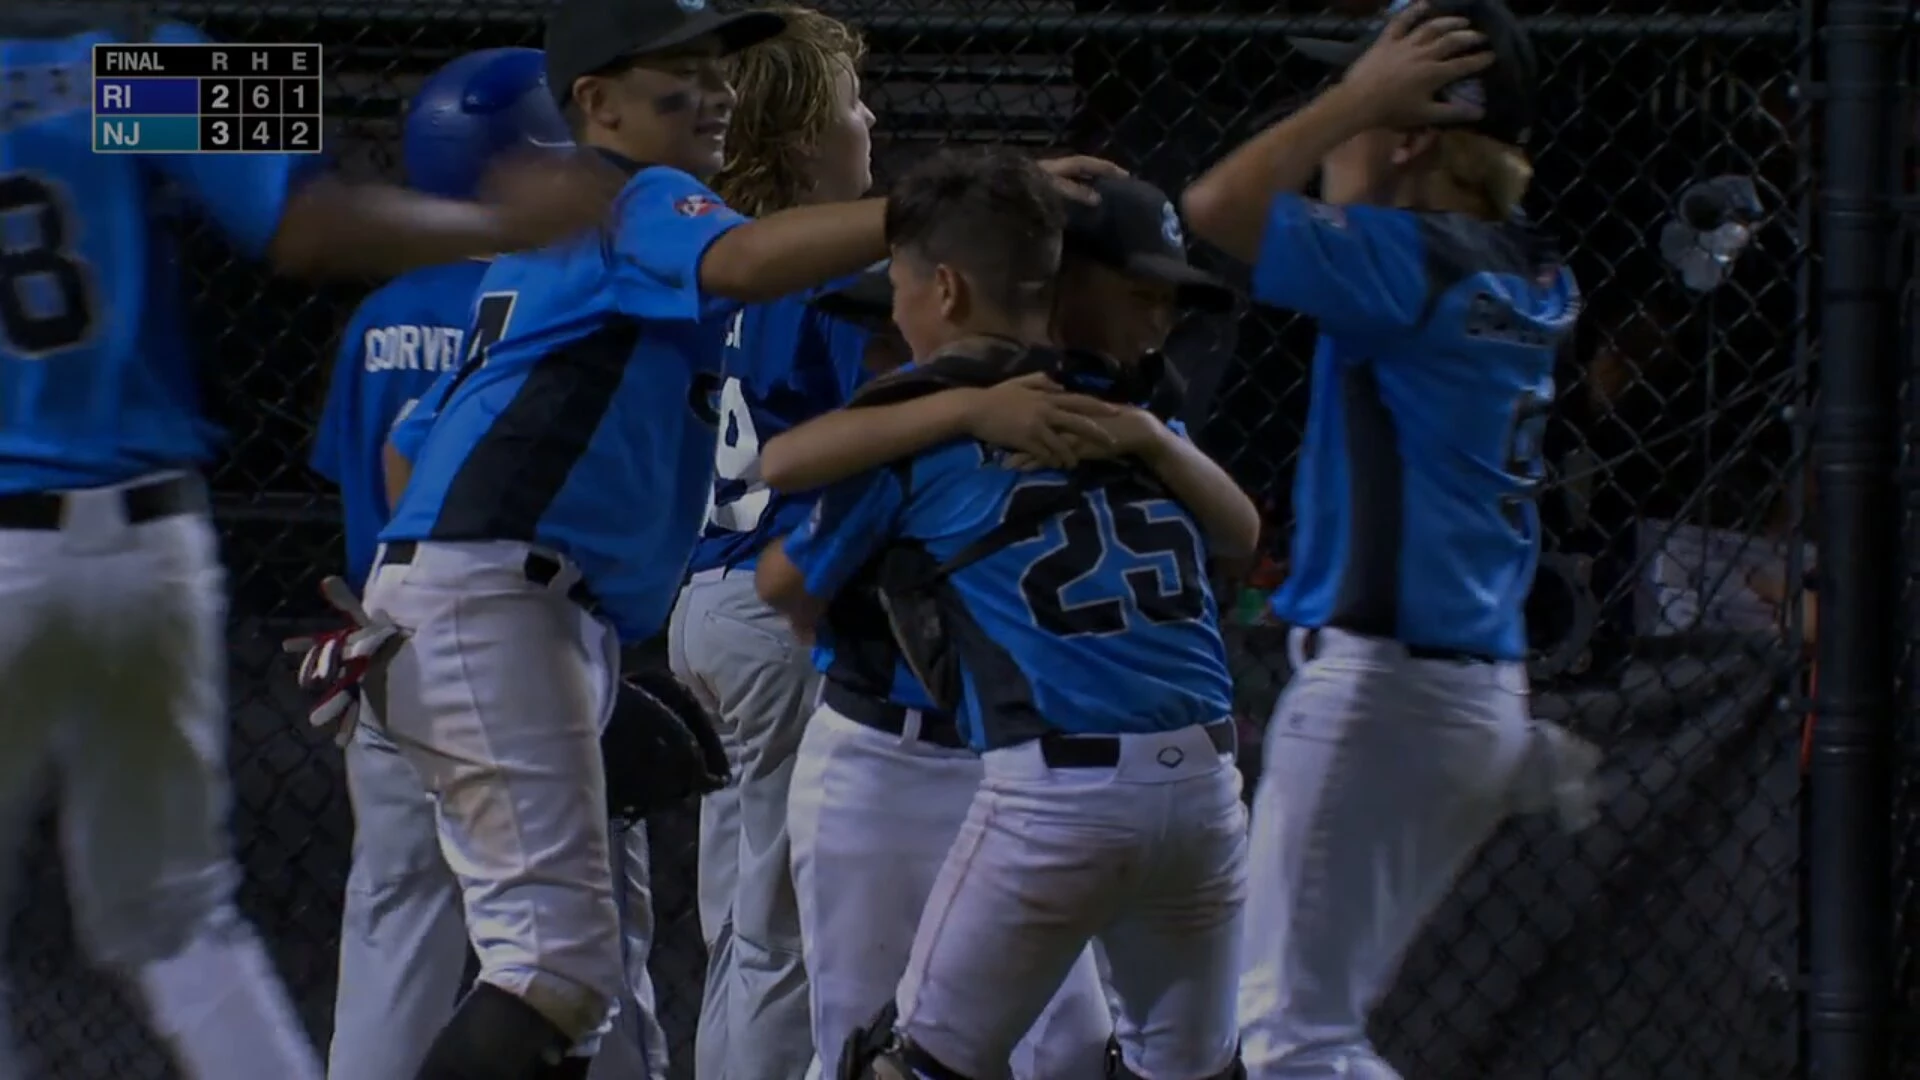 Meet the N.J. Little Leaguers who are a few games away from the World Series  